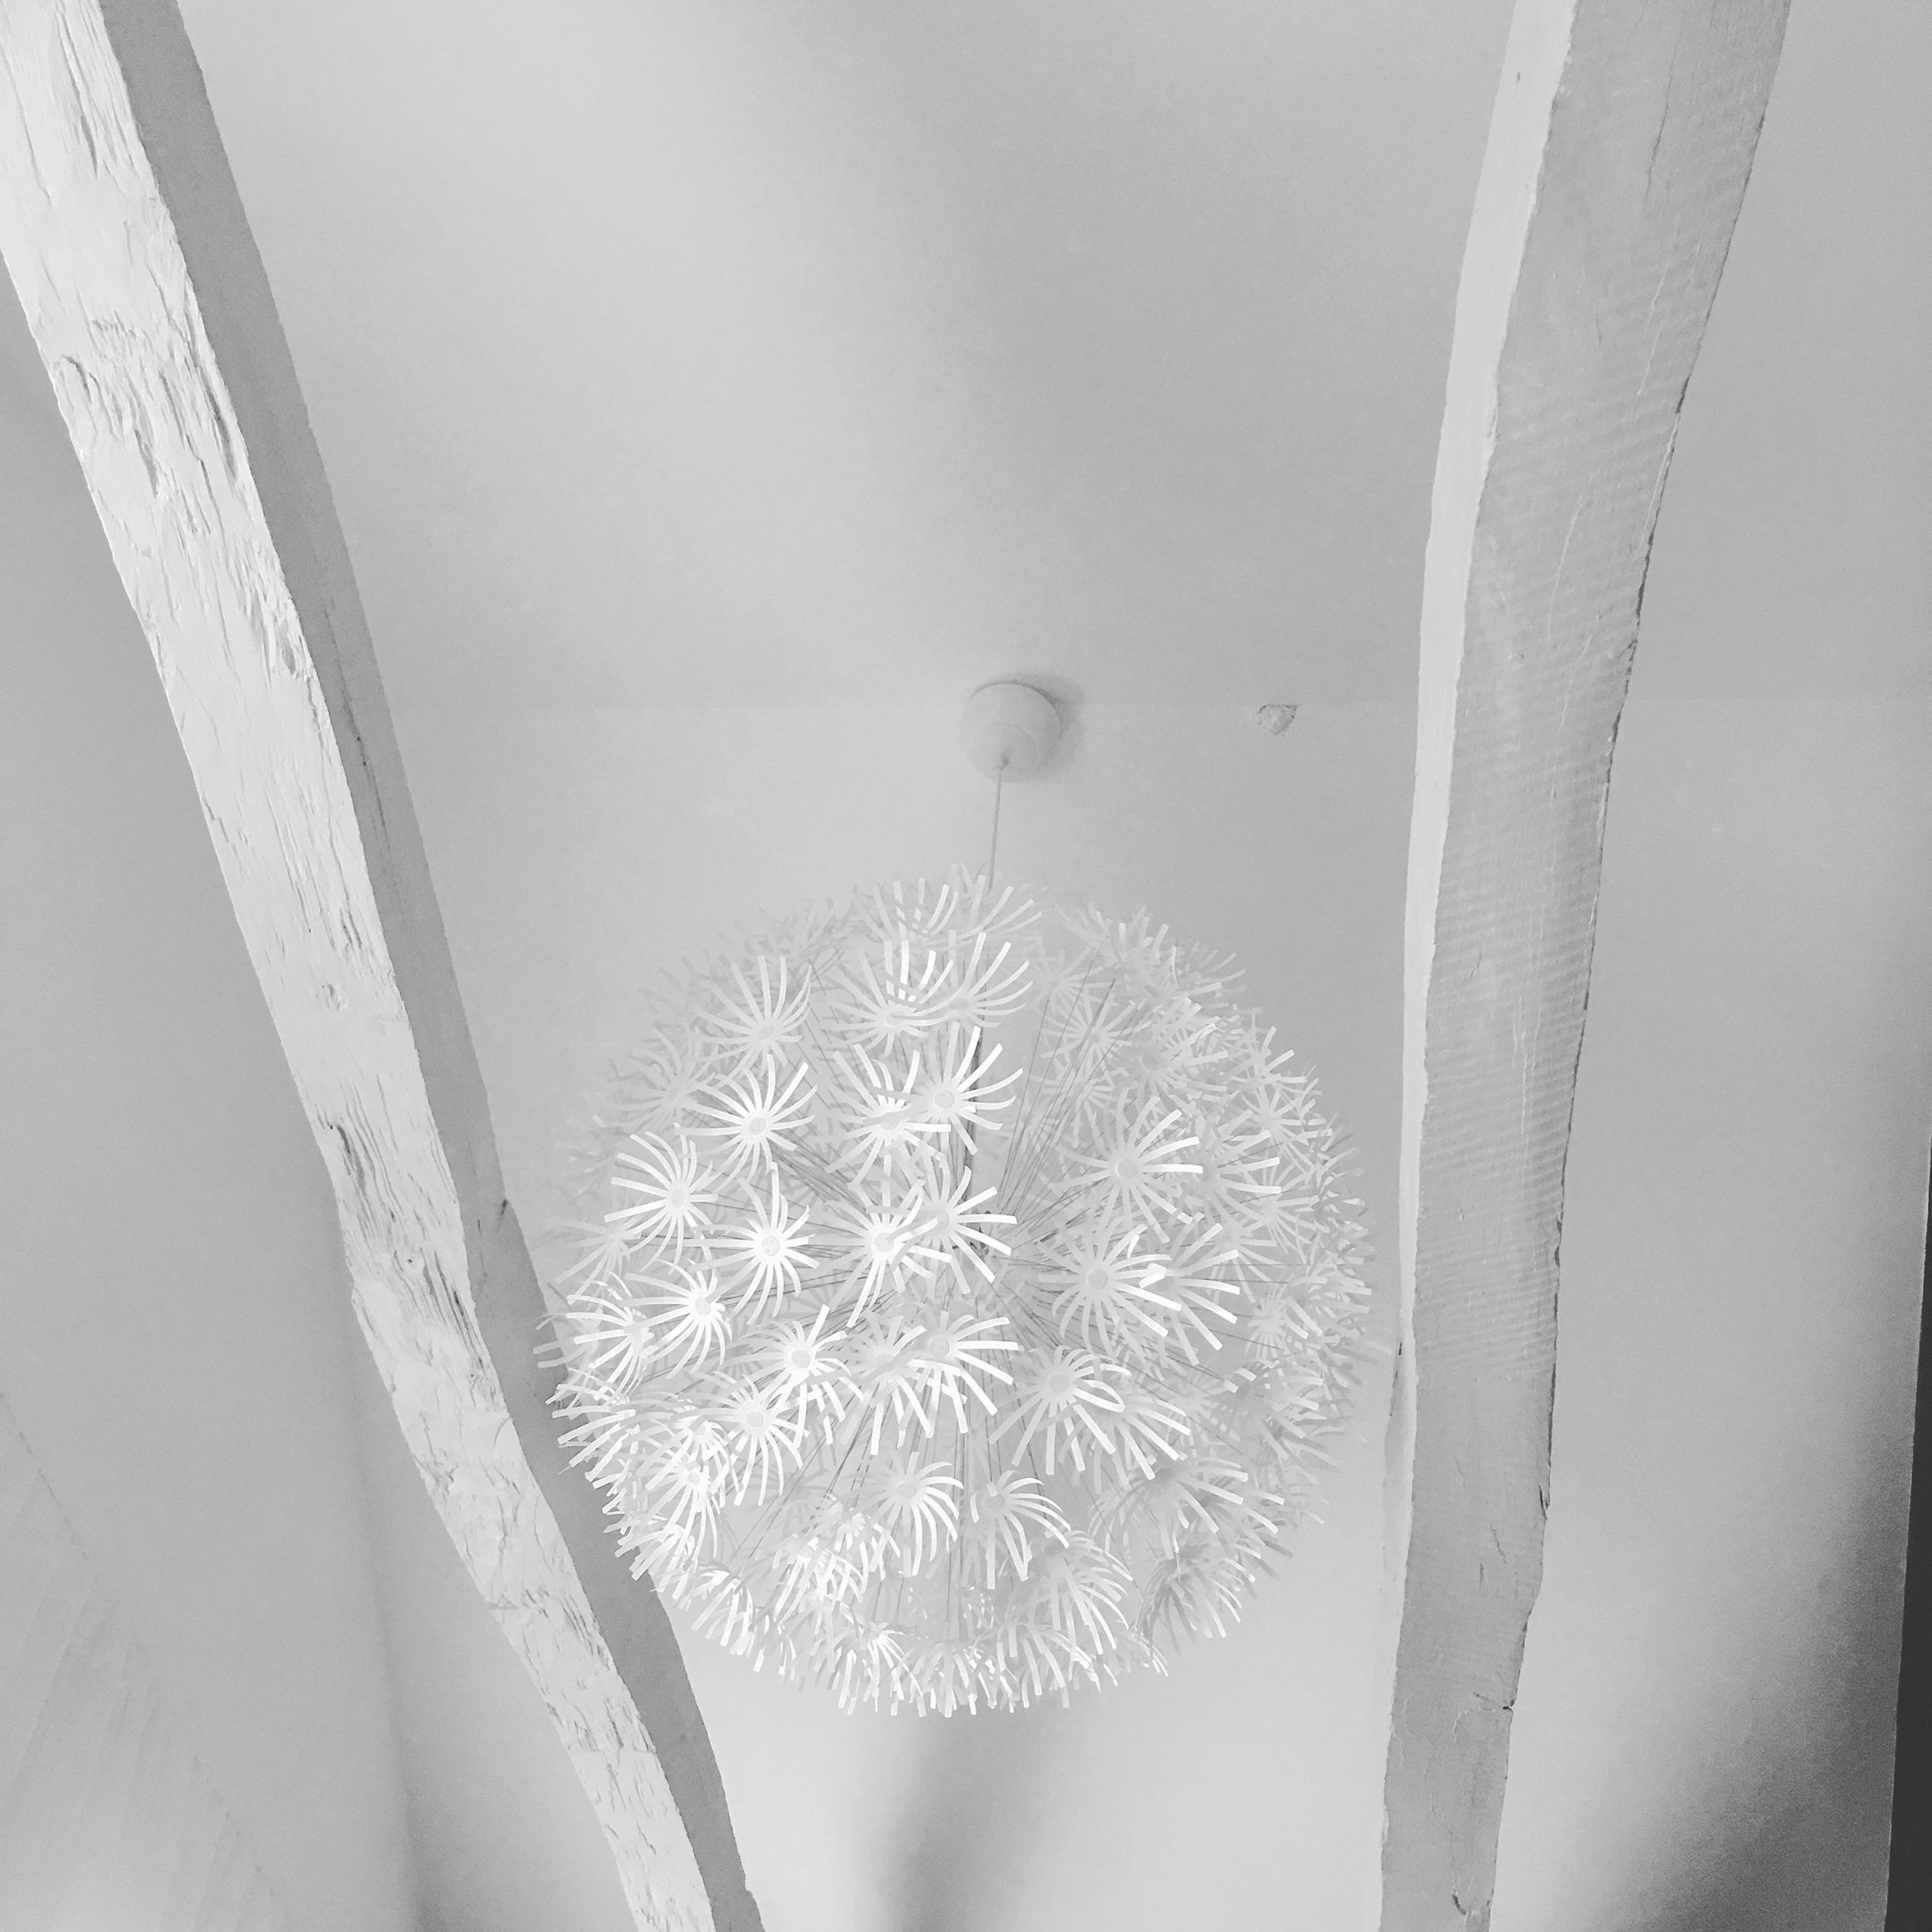 IKEA Maskros pendant lightshades work a treat in the high ceiling – and cast very pretty shadows...